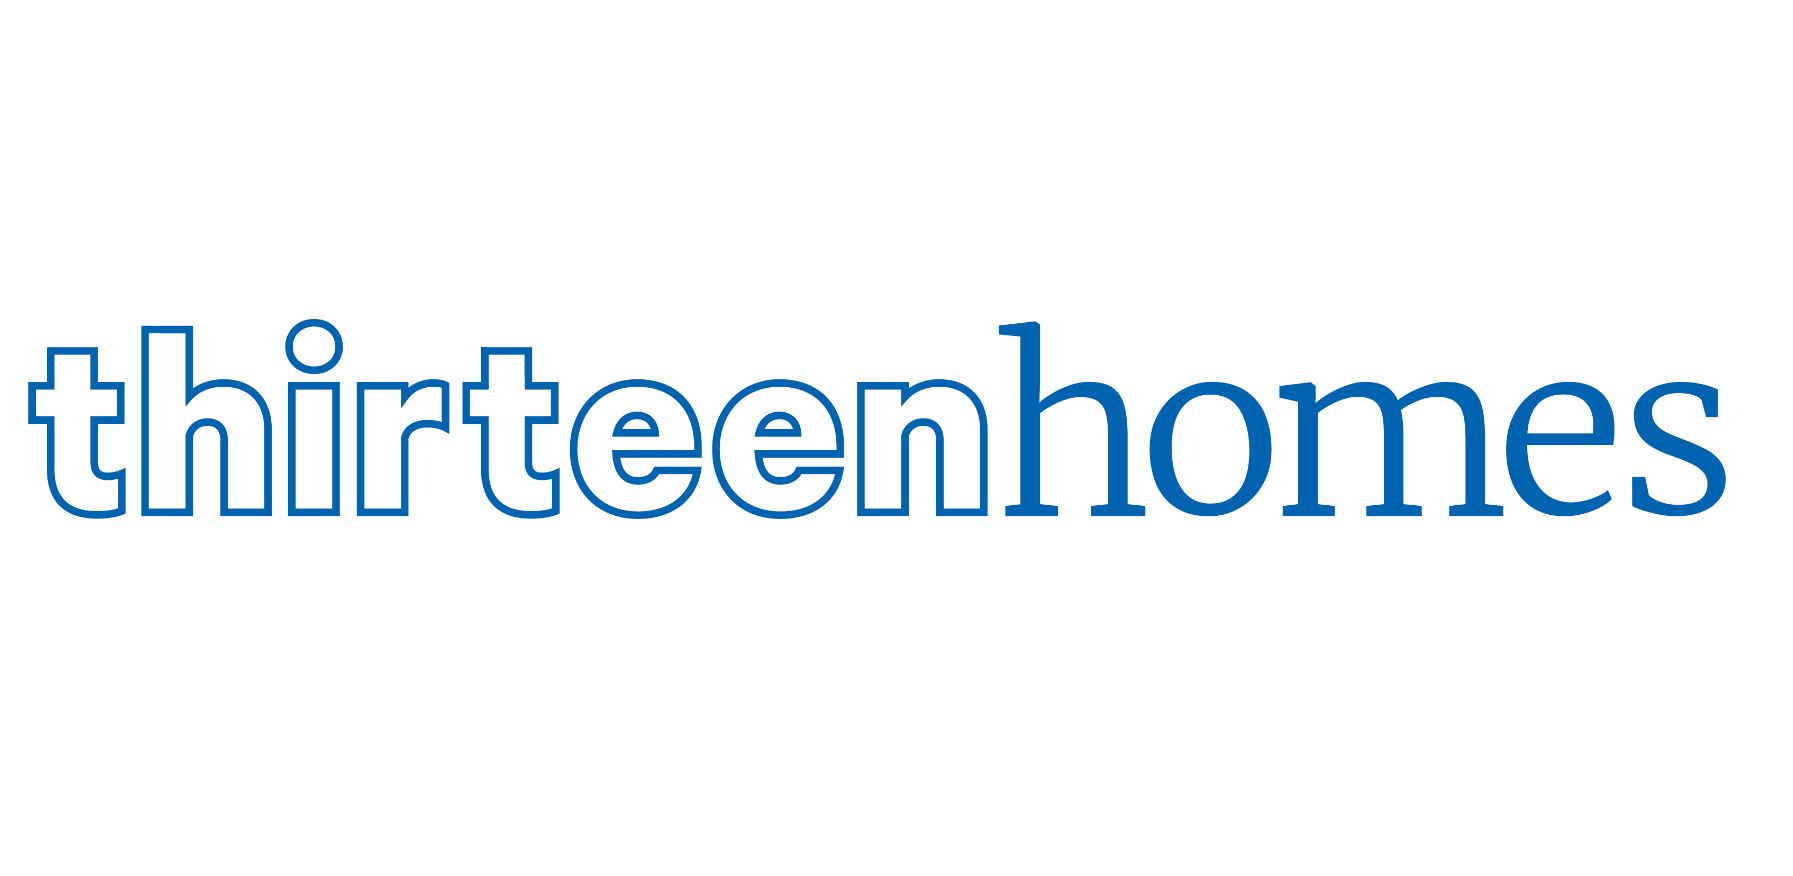 We would like to welcome Thirteen Homes to ContactBuilder